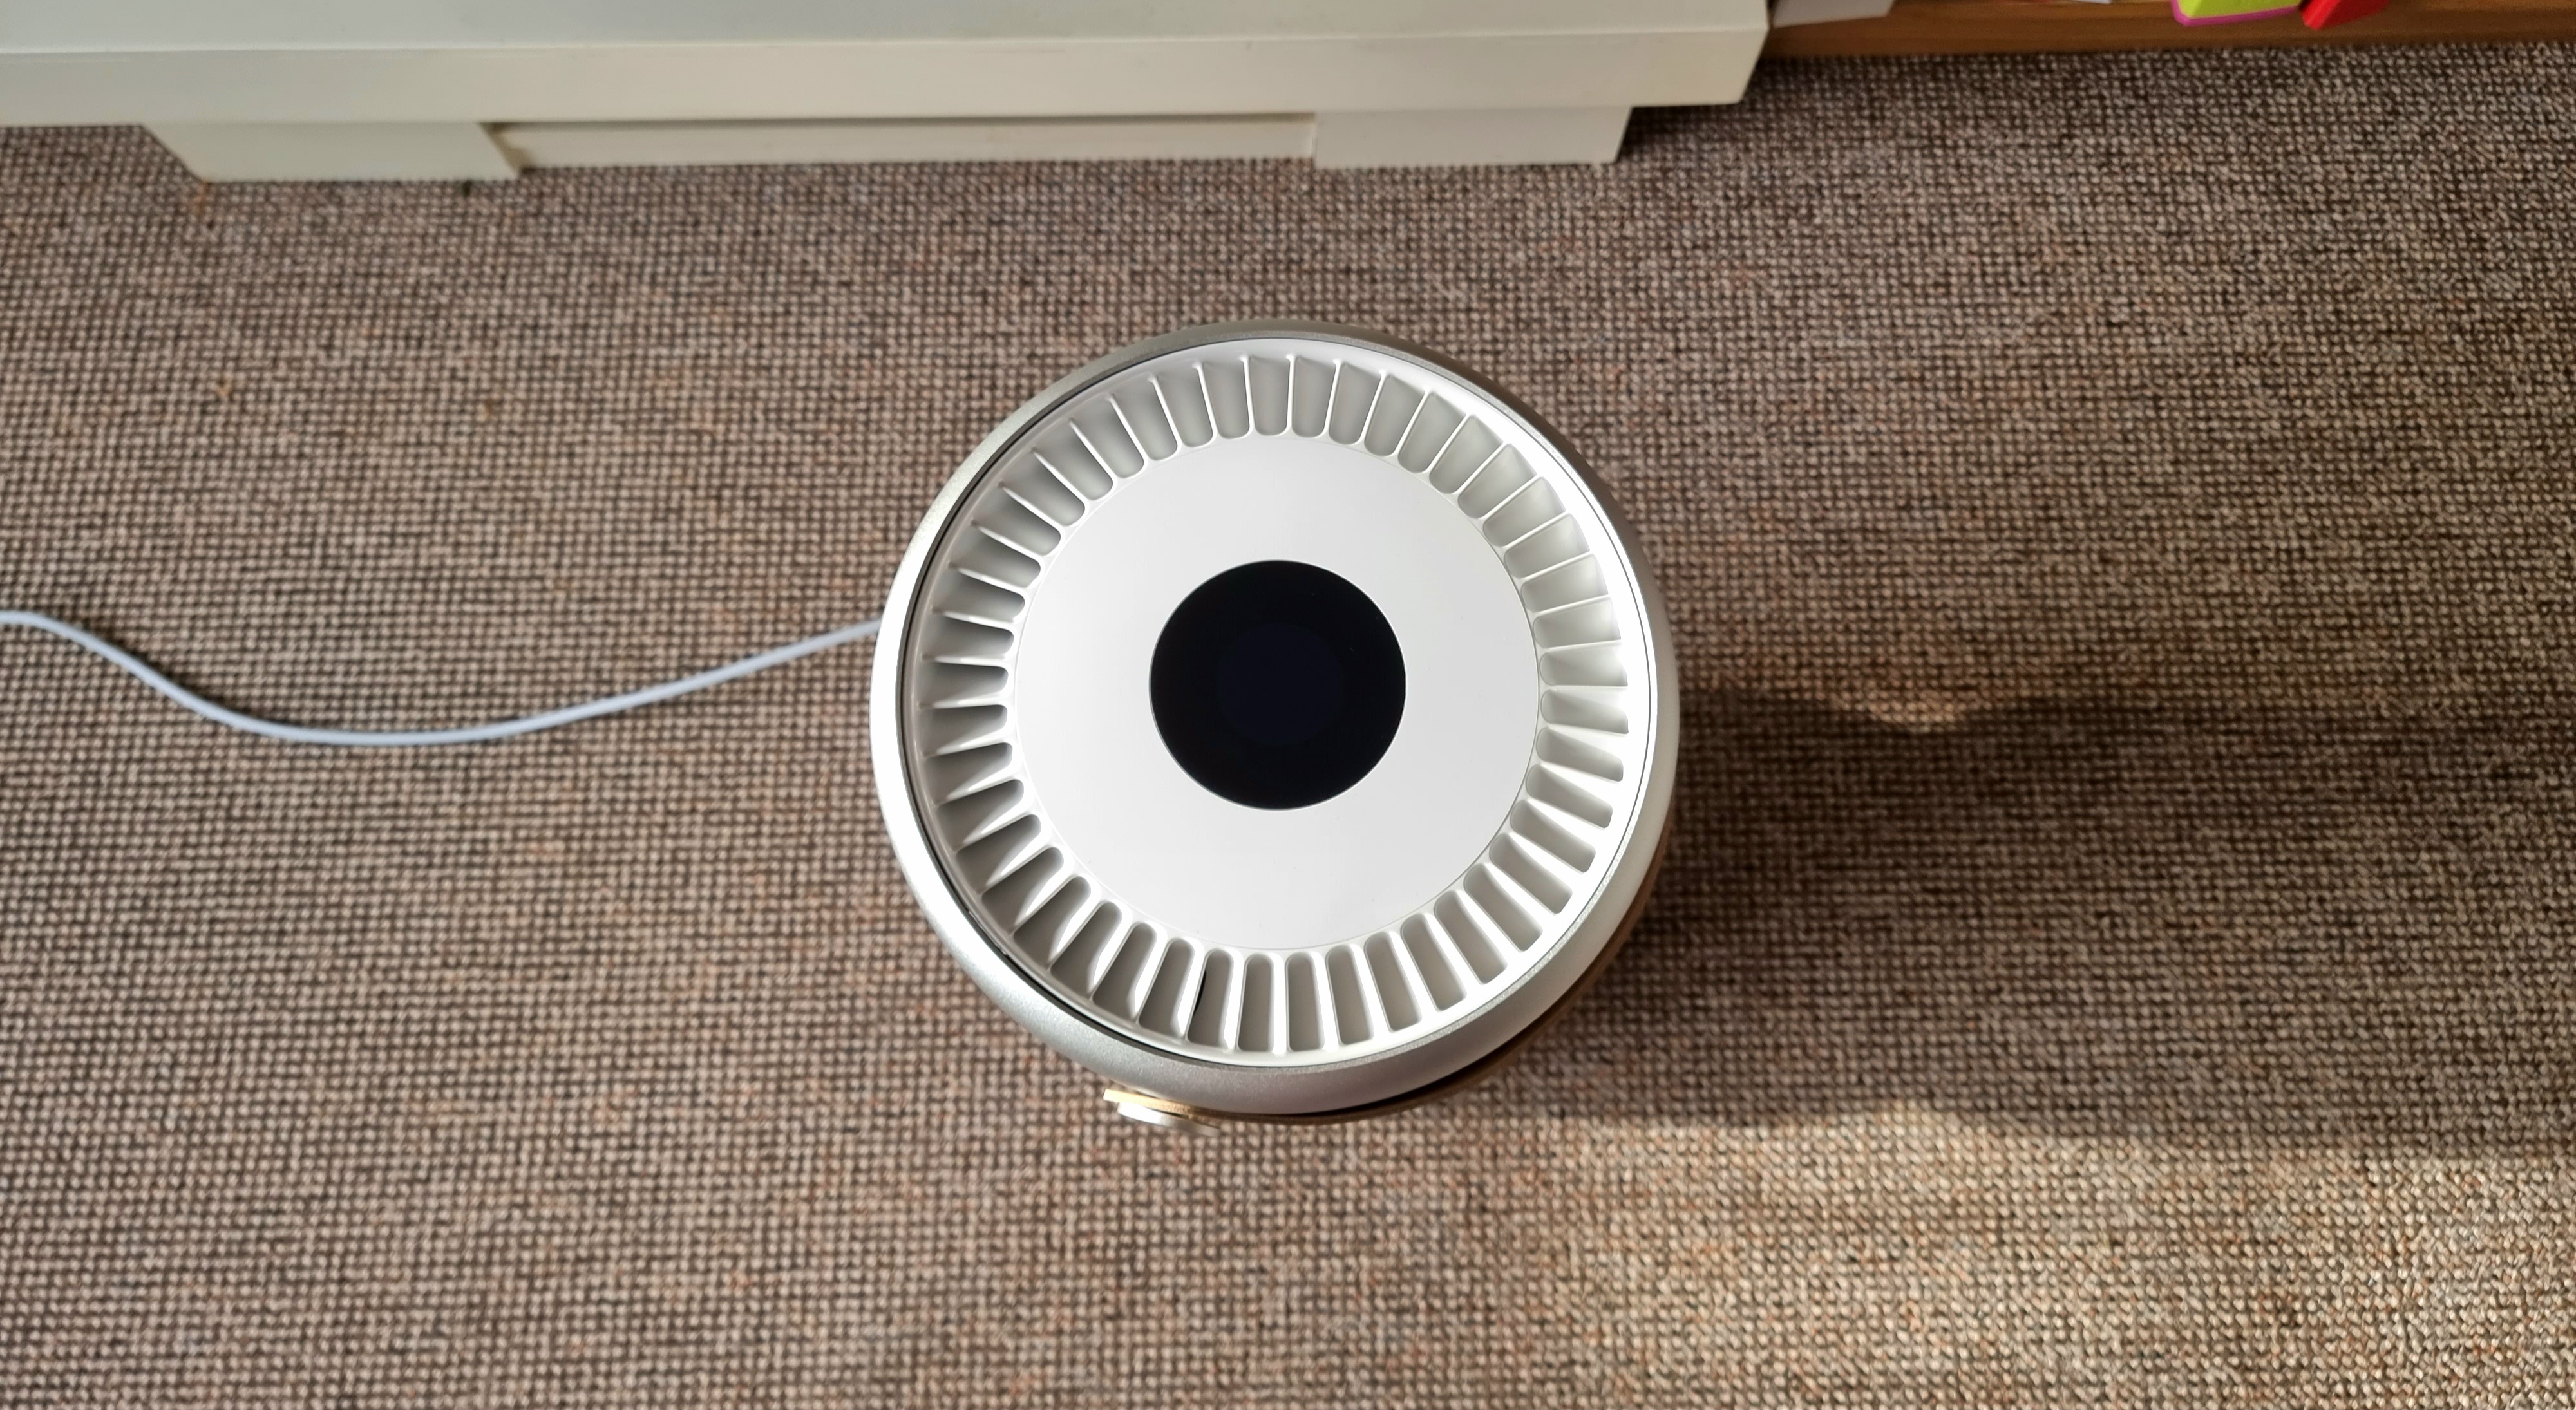 The Molekule Air Pro air purifier, view from the top